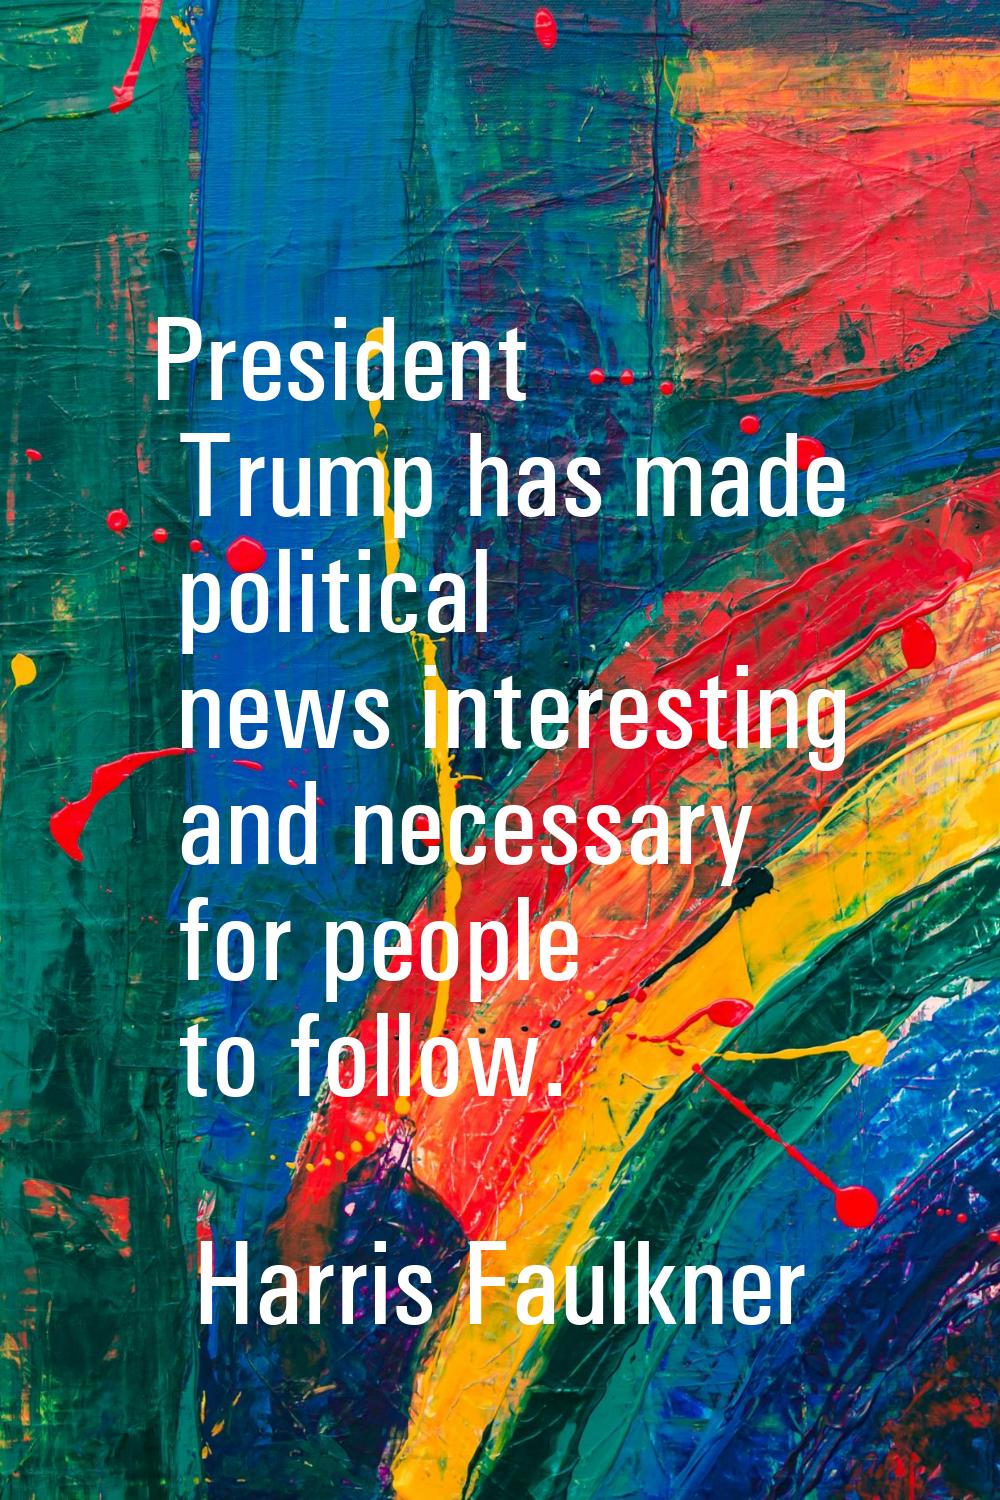 President Trump has made political news interesting and necessary for people to follow.